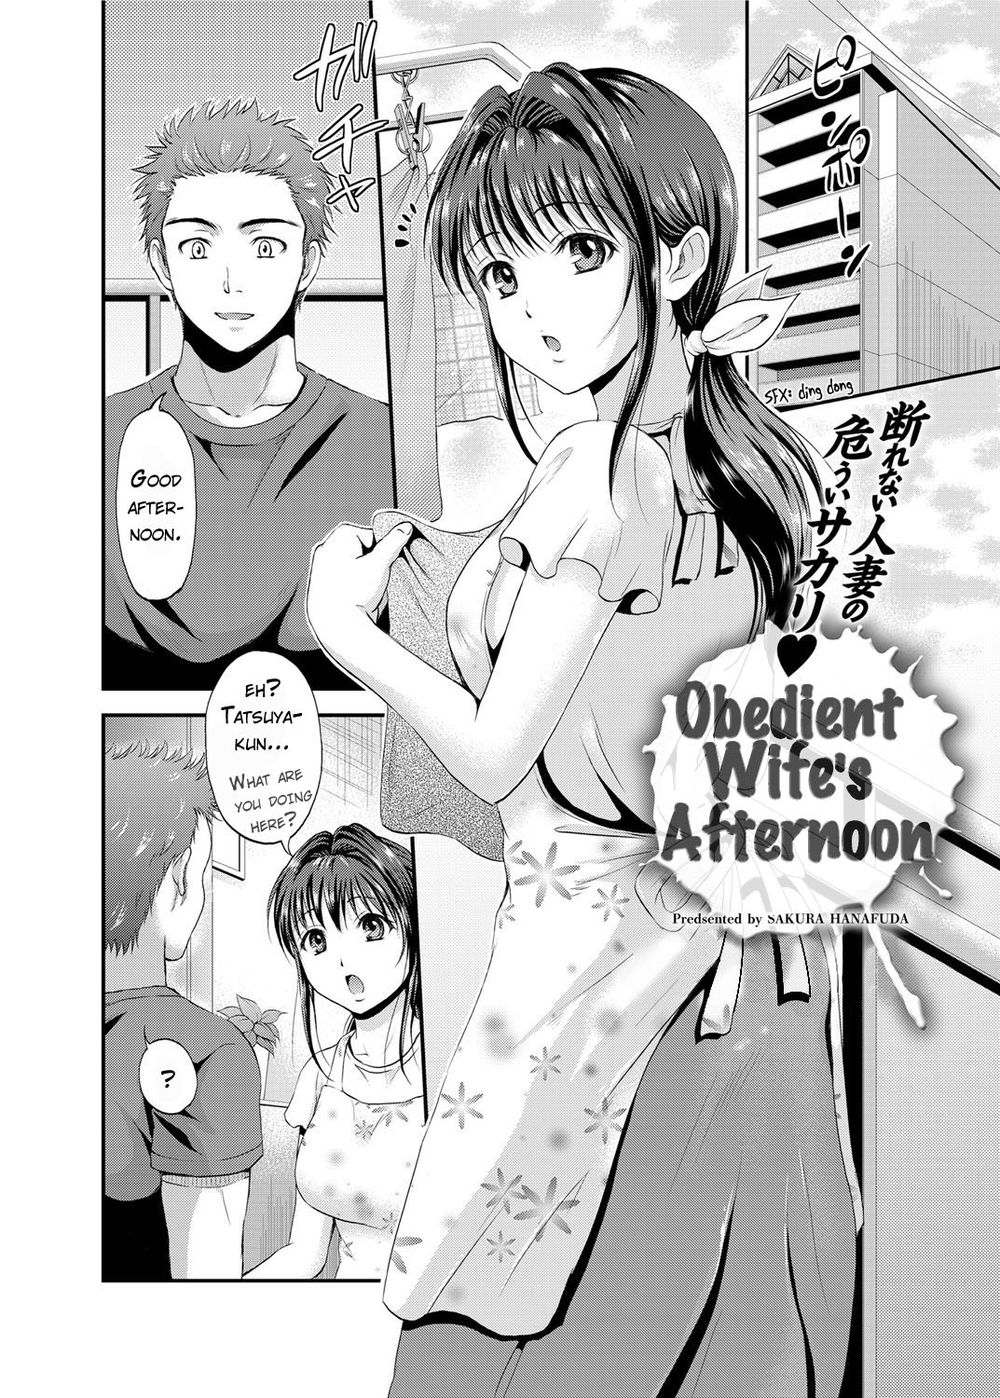 Hentai Manga Comic-The Obedient Wife's Afternoon-Read-2